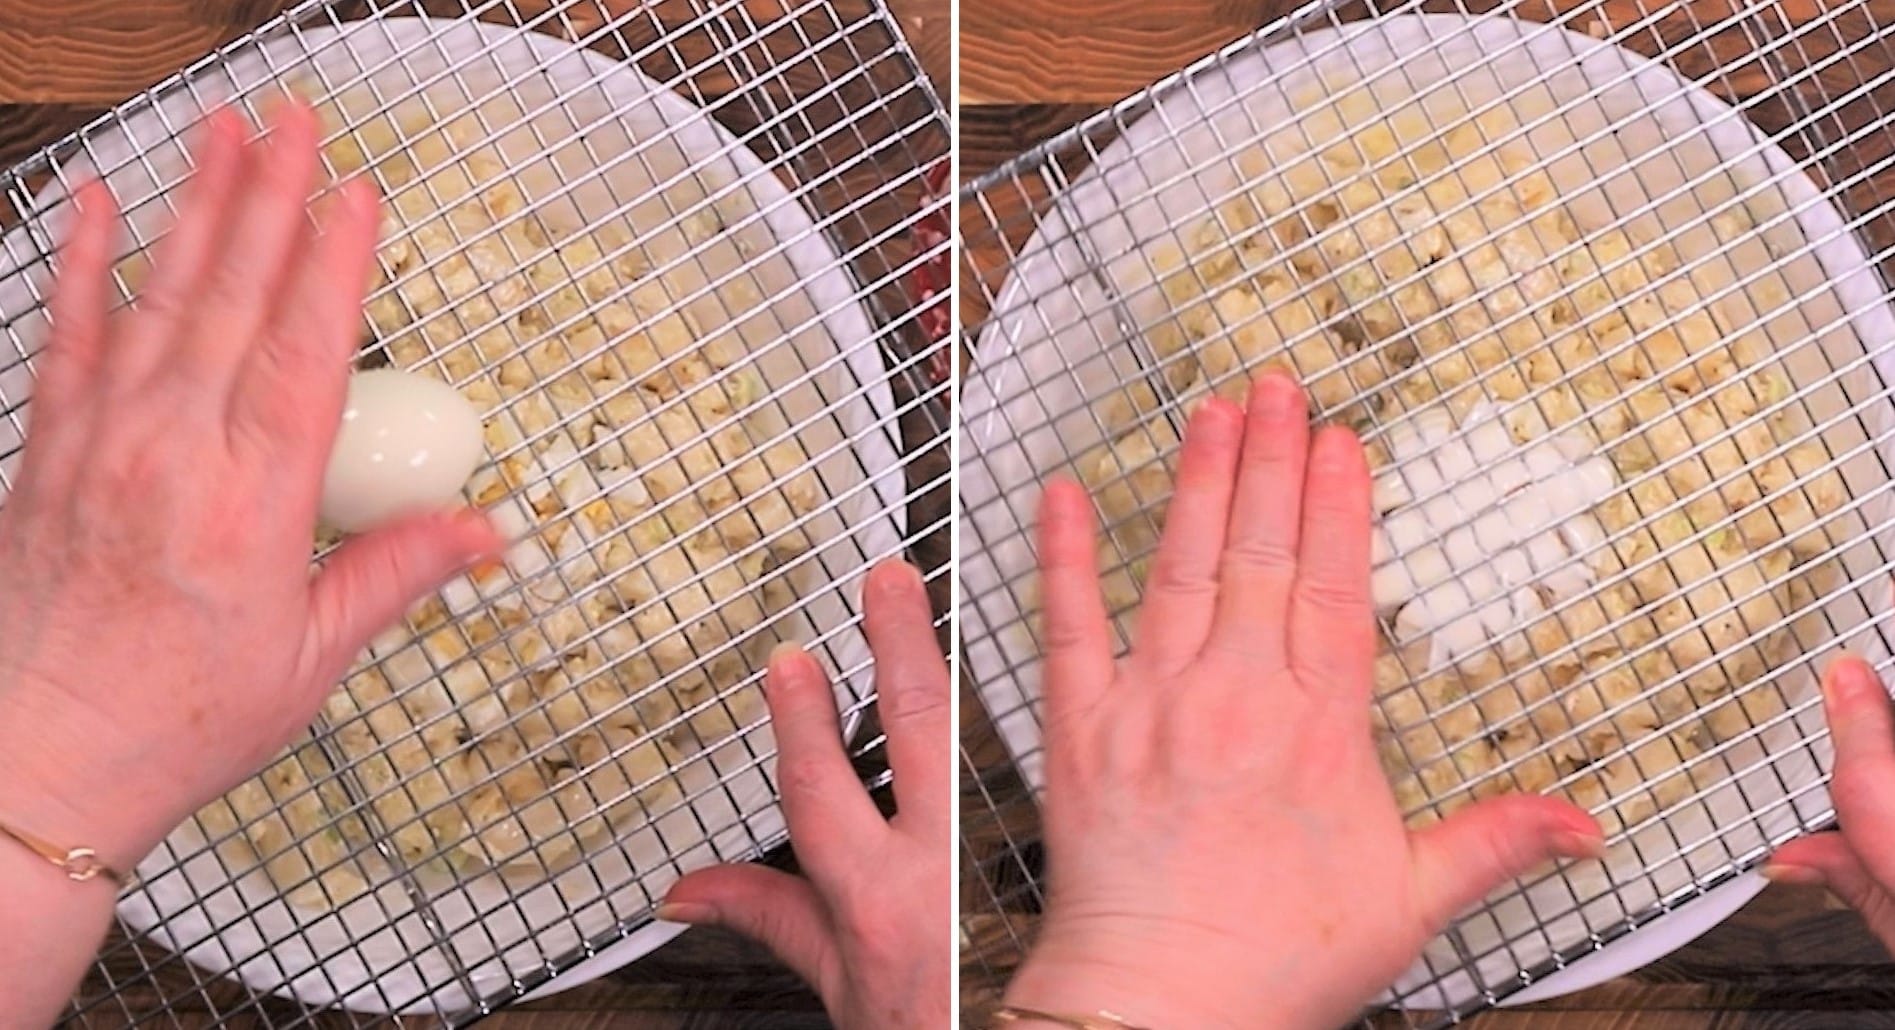 Two photos both with white bowl full of cauliflower salad. First photo shows a baking rack over the bowl with one egg and Jill's hand pushing the egg through the grates. Second photo shows Jill's hand rubbing the left on egg off the grates and into the bowl.